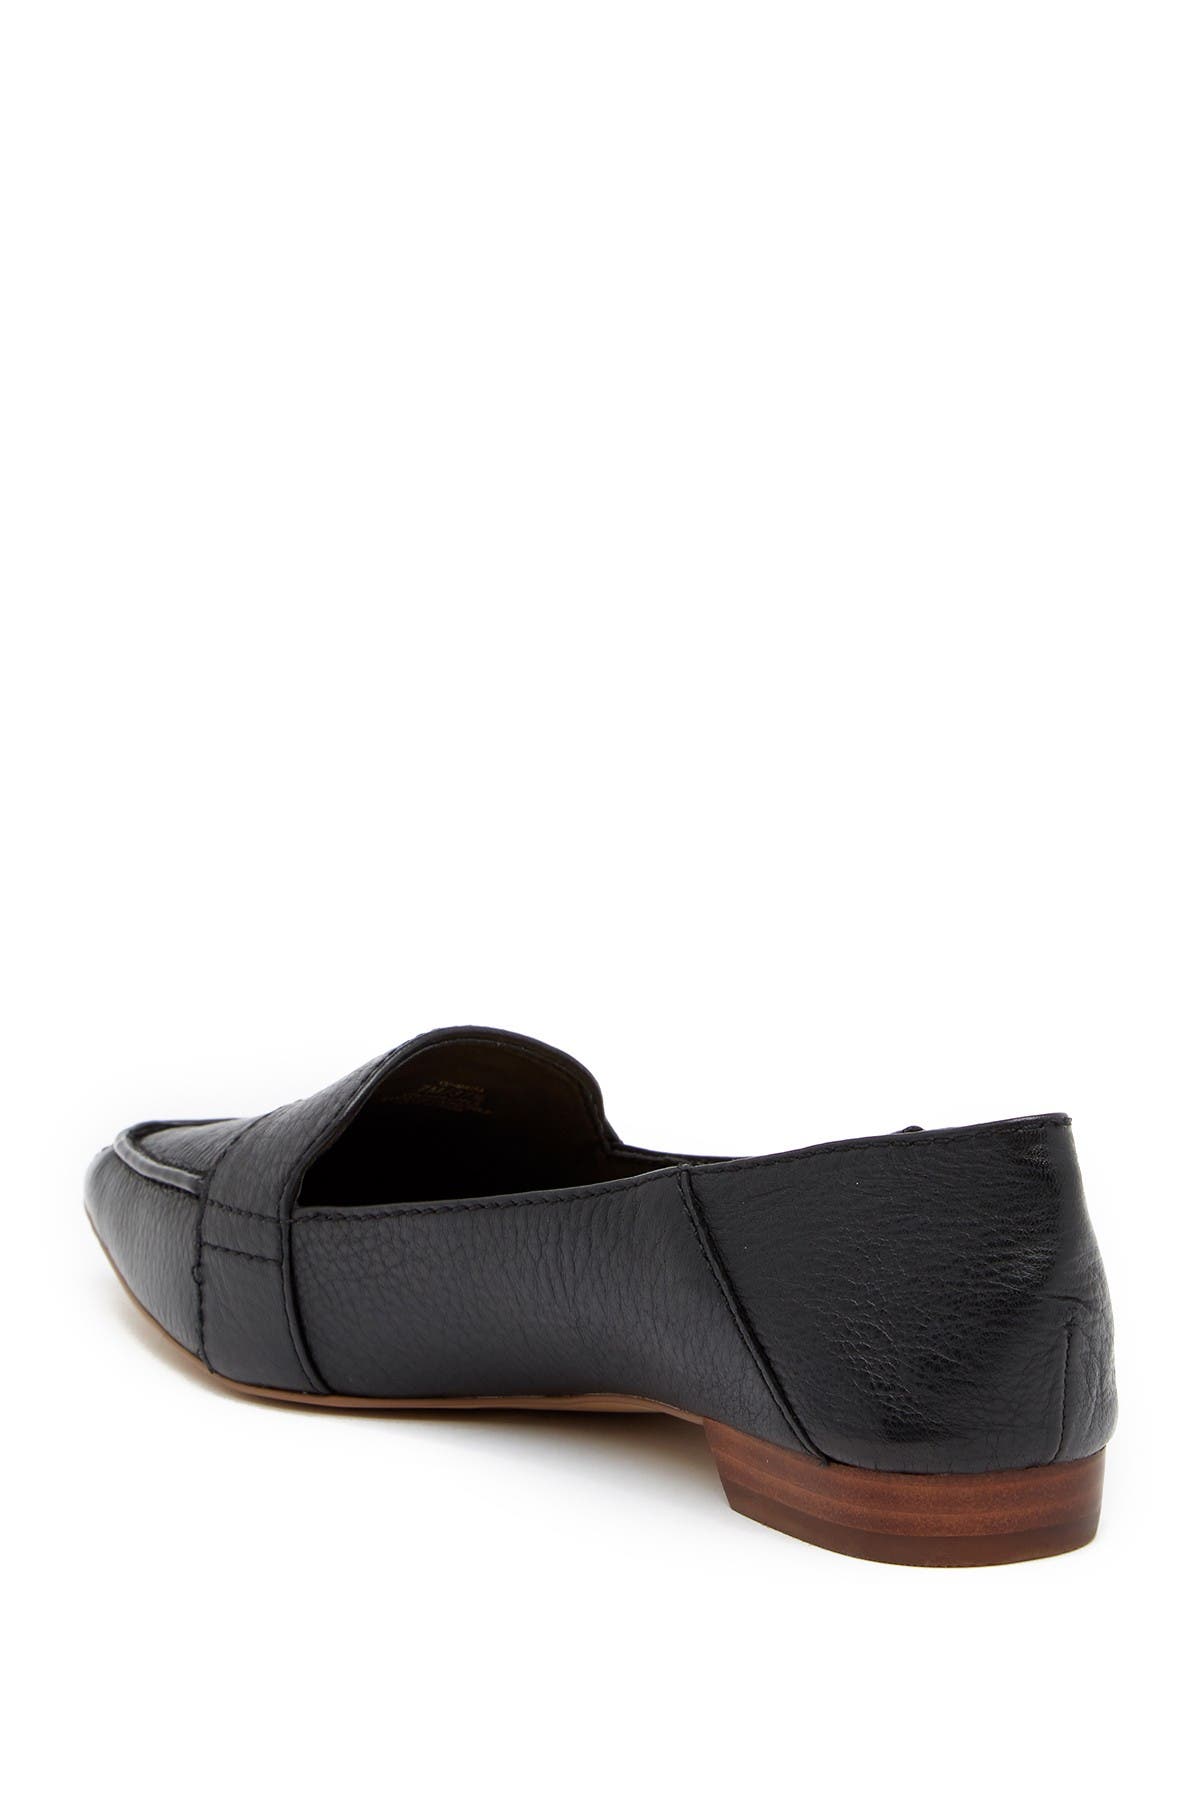 vince camuto maita pointed toe loafer